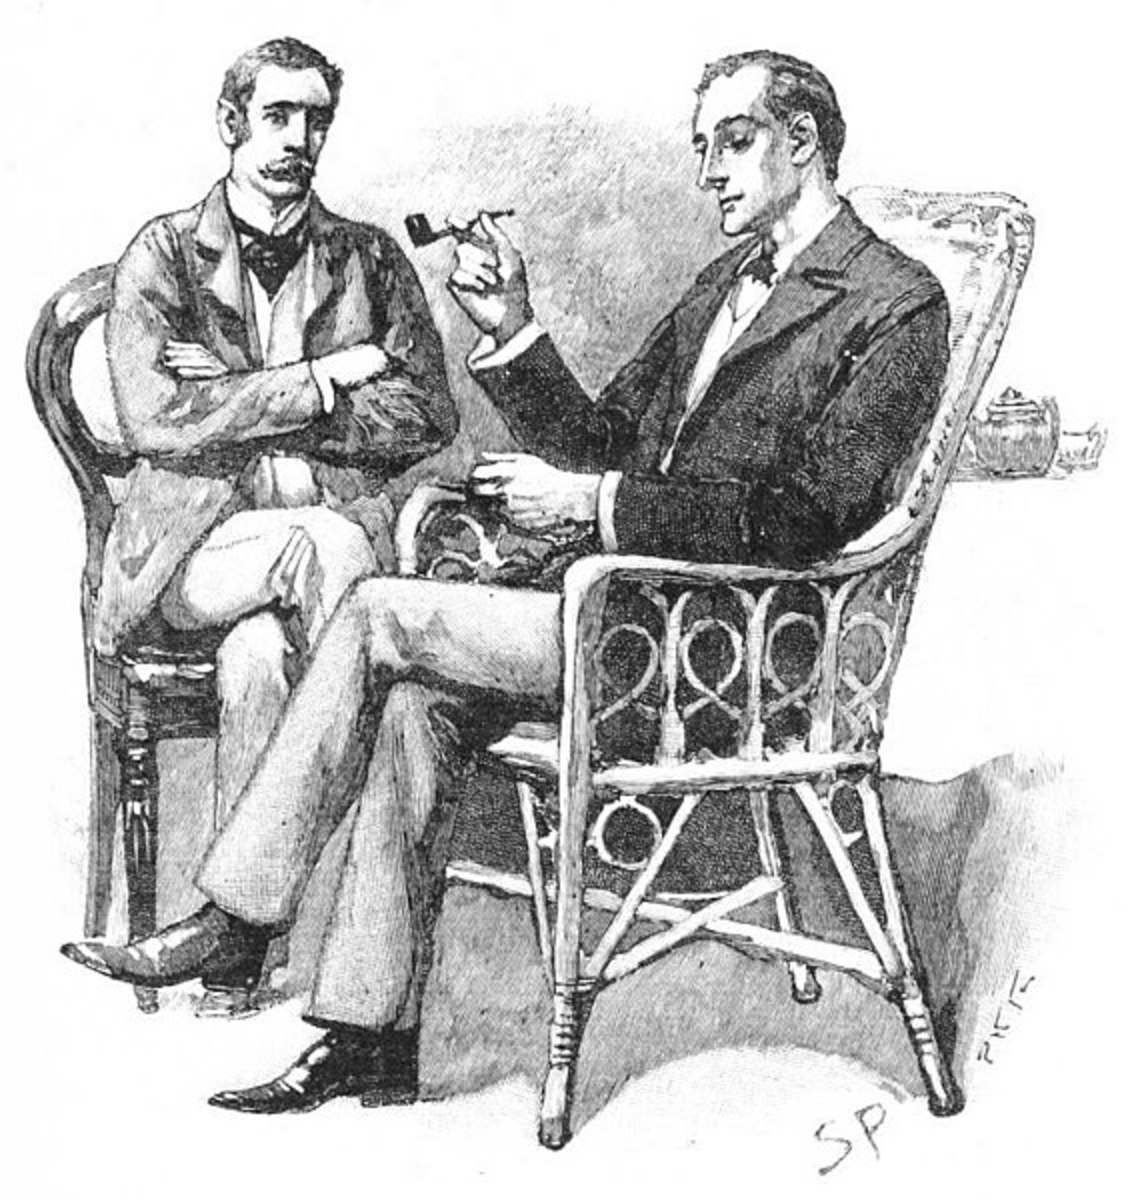 Sherlock Holmes and Dr. John Watson. September 1893, in the Strand Magazine; by Signey Paget (1860-1908).